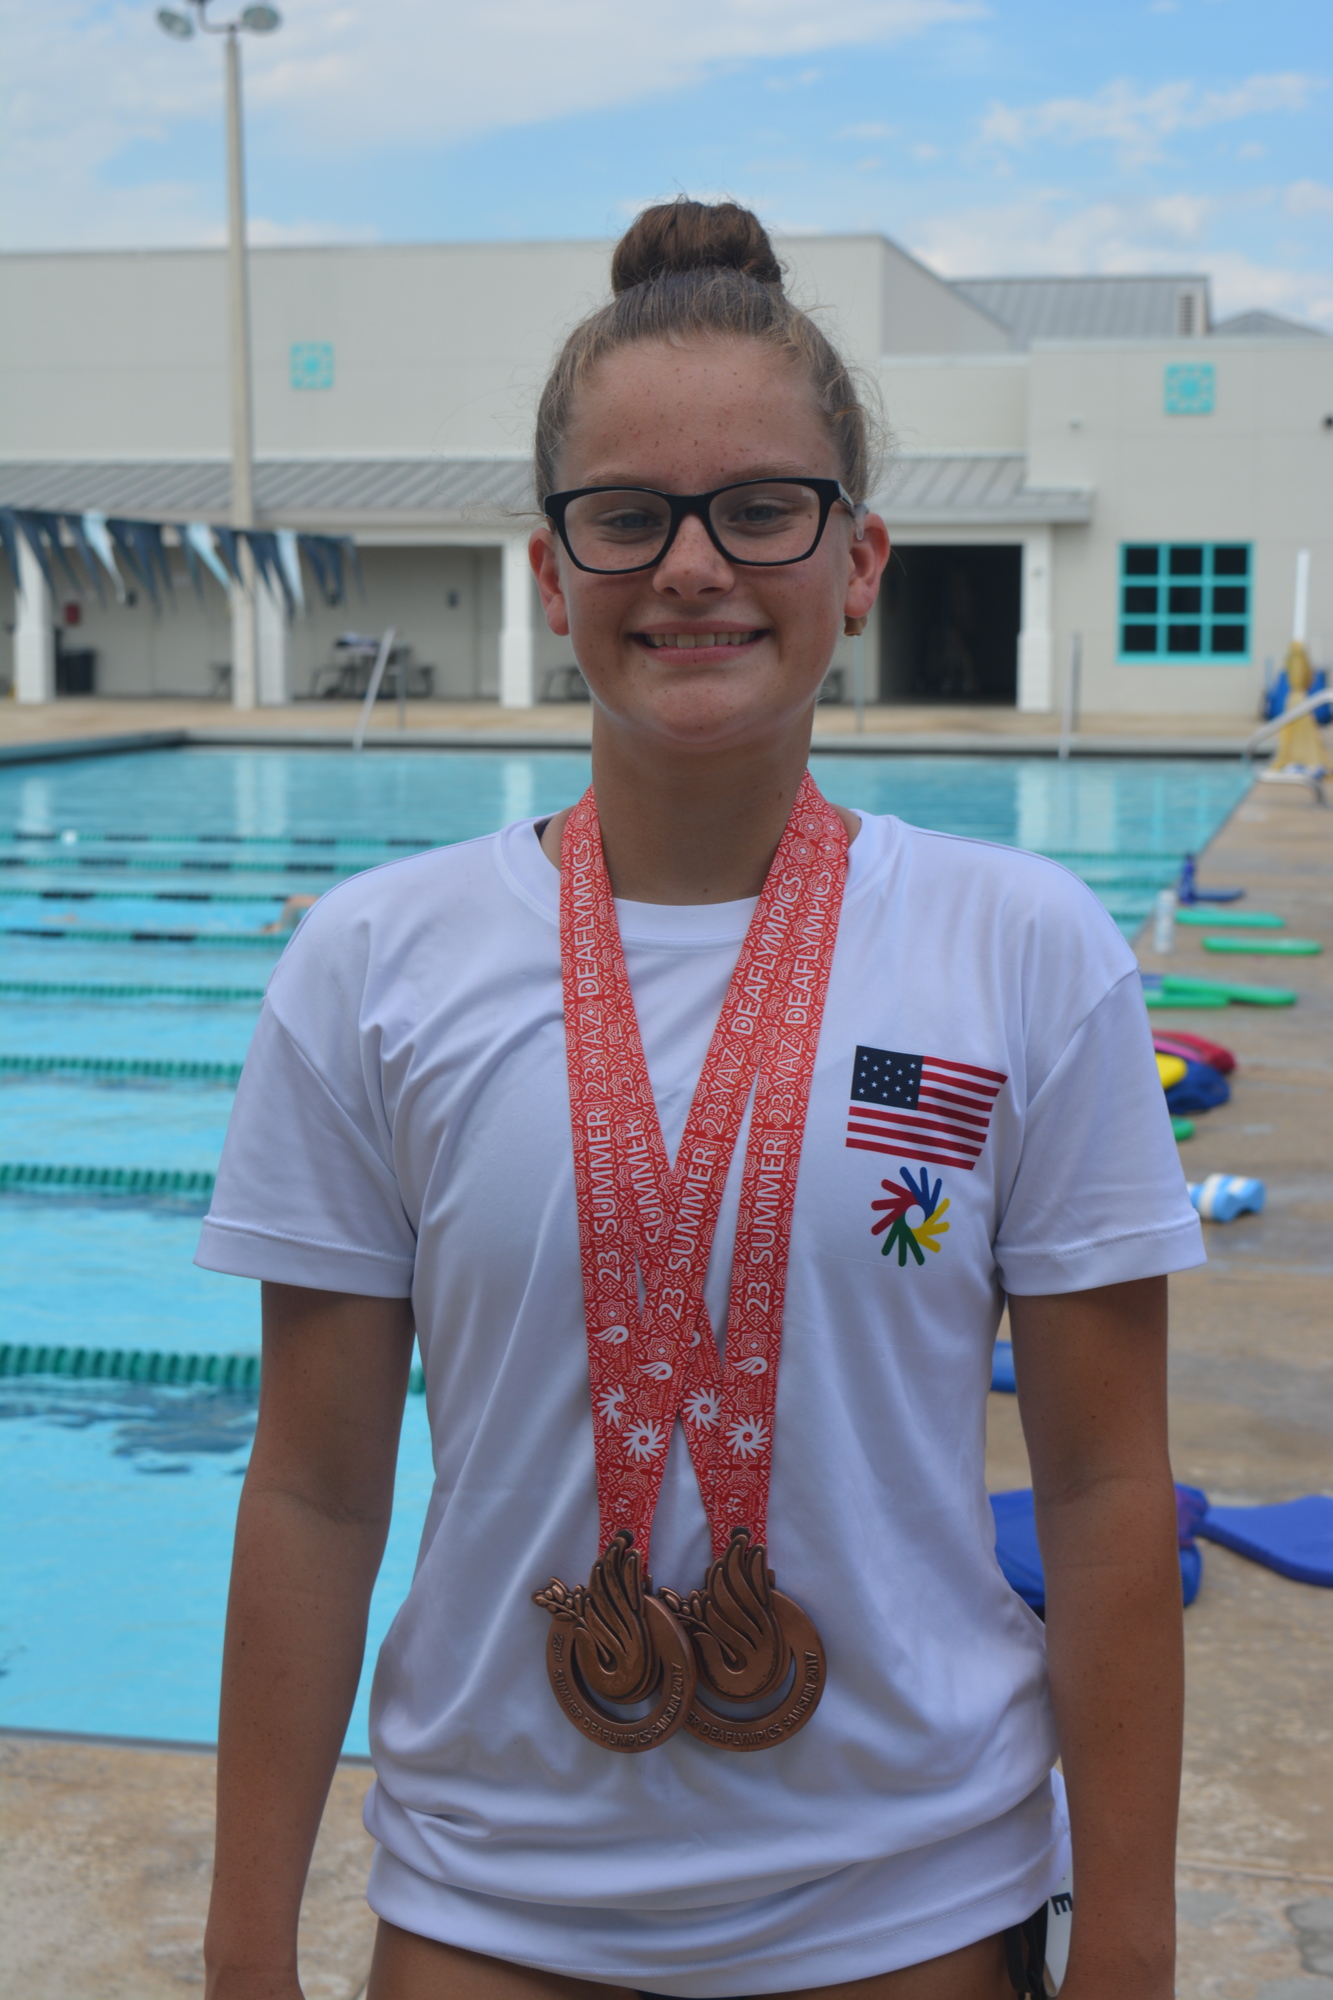 Emily Massengale won two bronze medals at the 2017 Deaflympics.